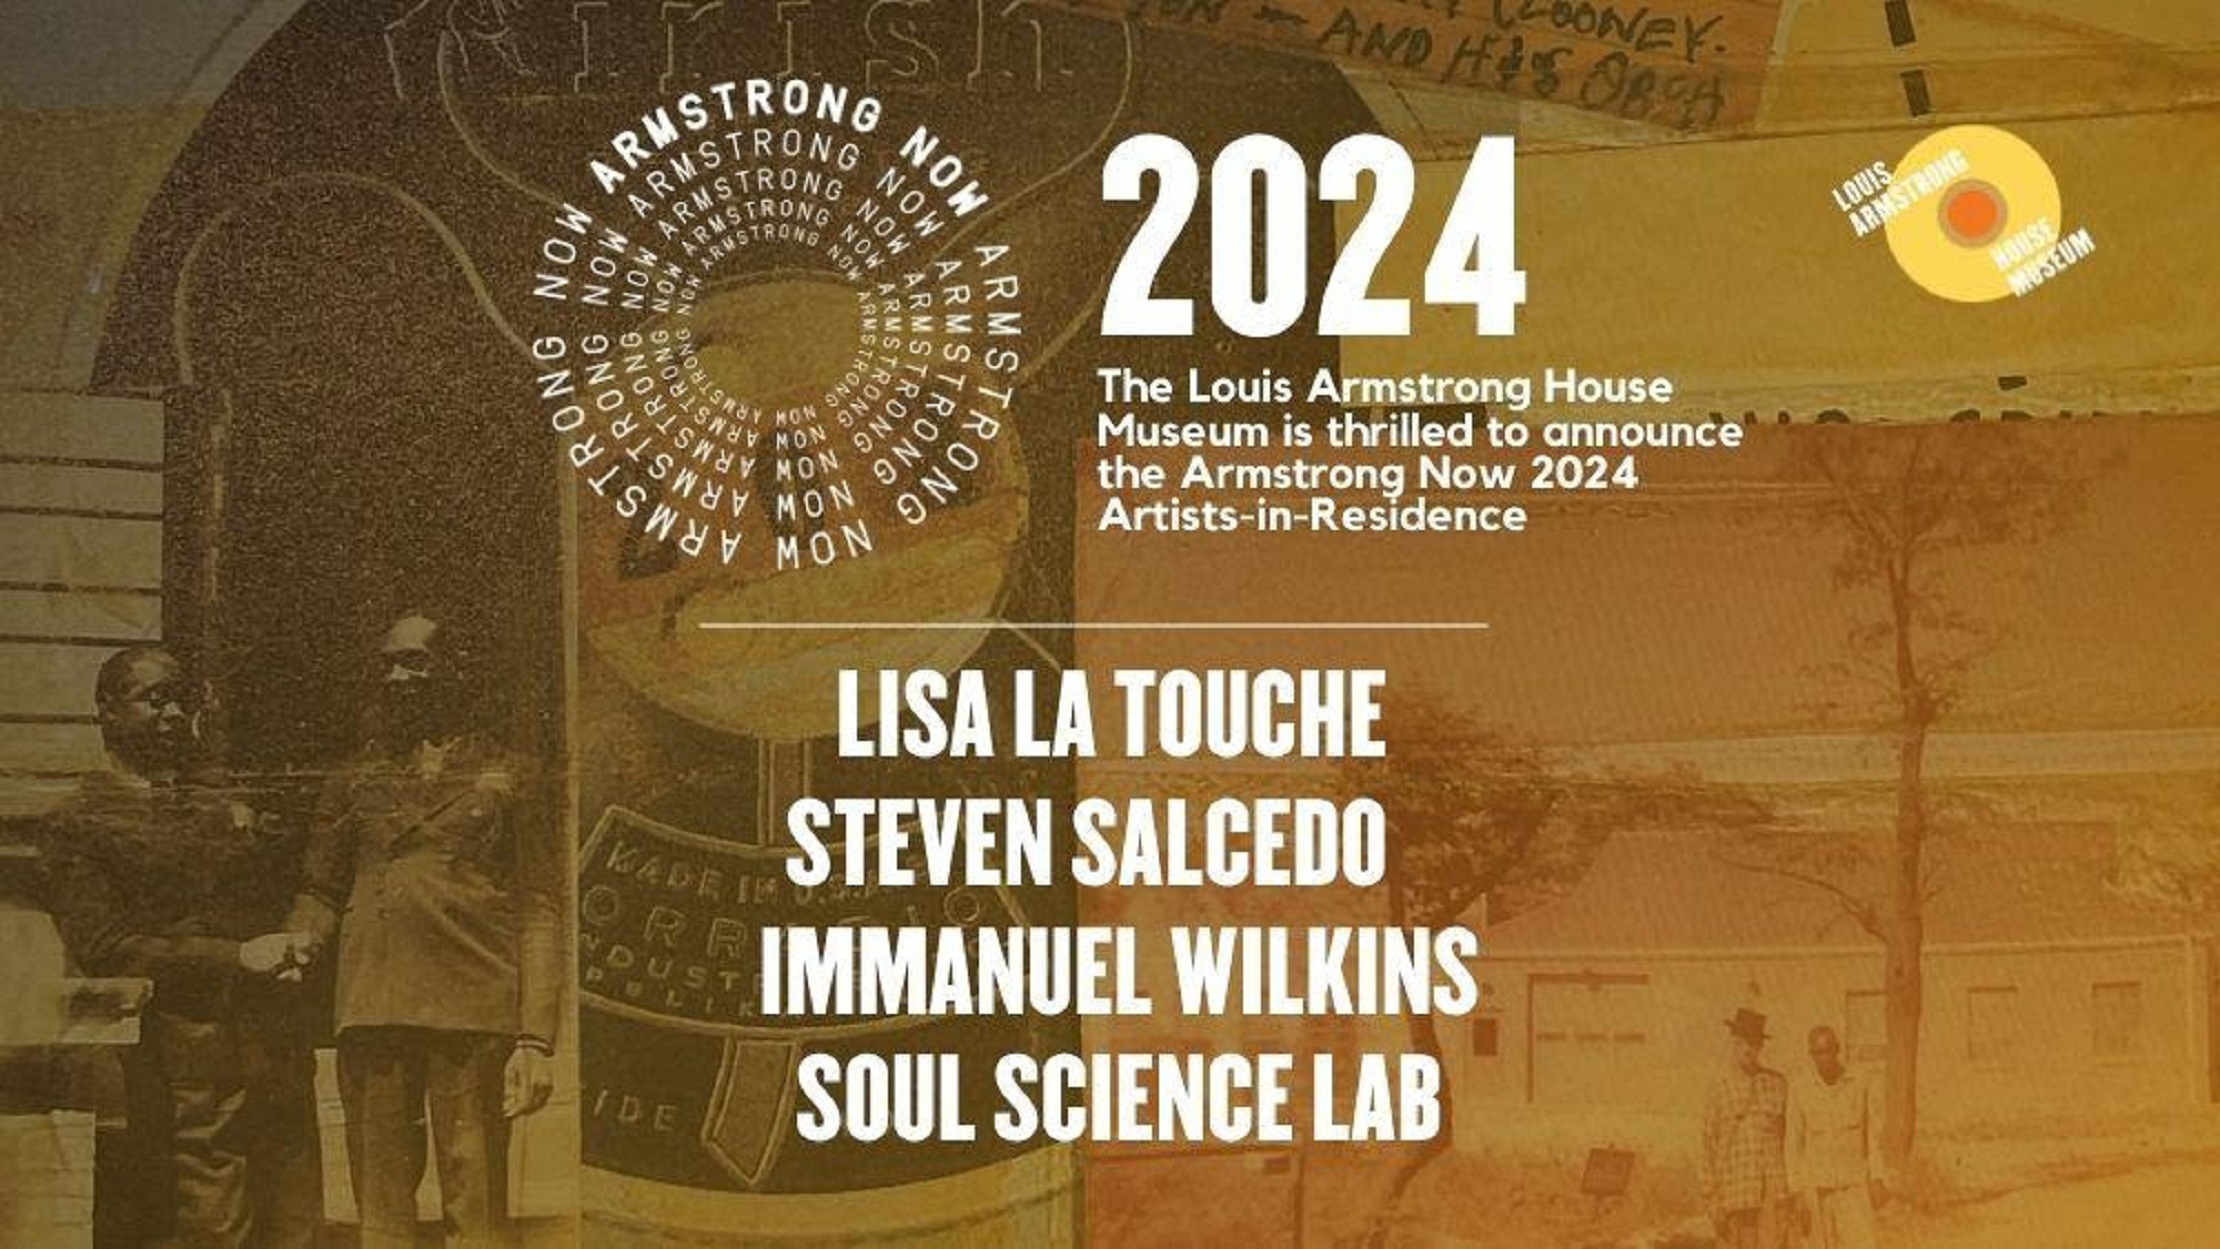 THE LOUIS ARMSTRONG HOUSE MUSEUM & CENTER ANNOUNCES 2024 ARMSTRONG NOW COHORTS